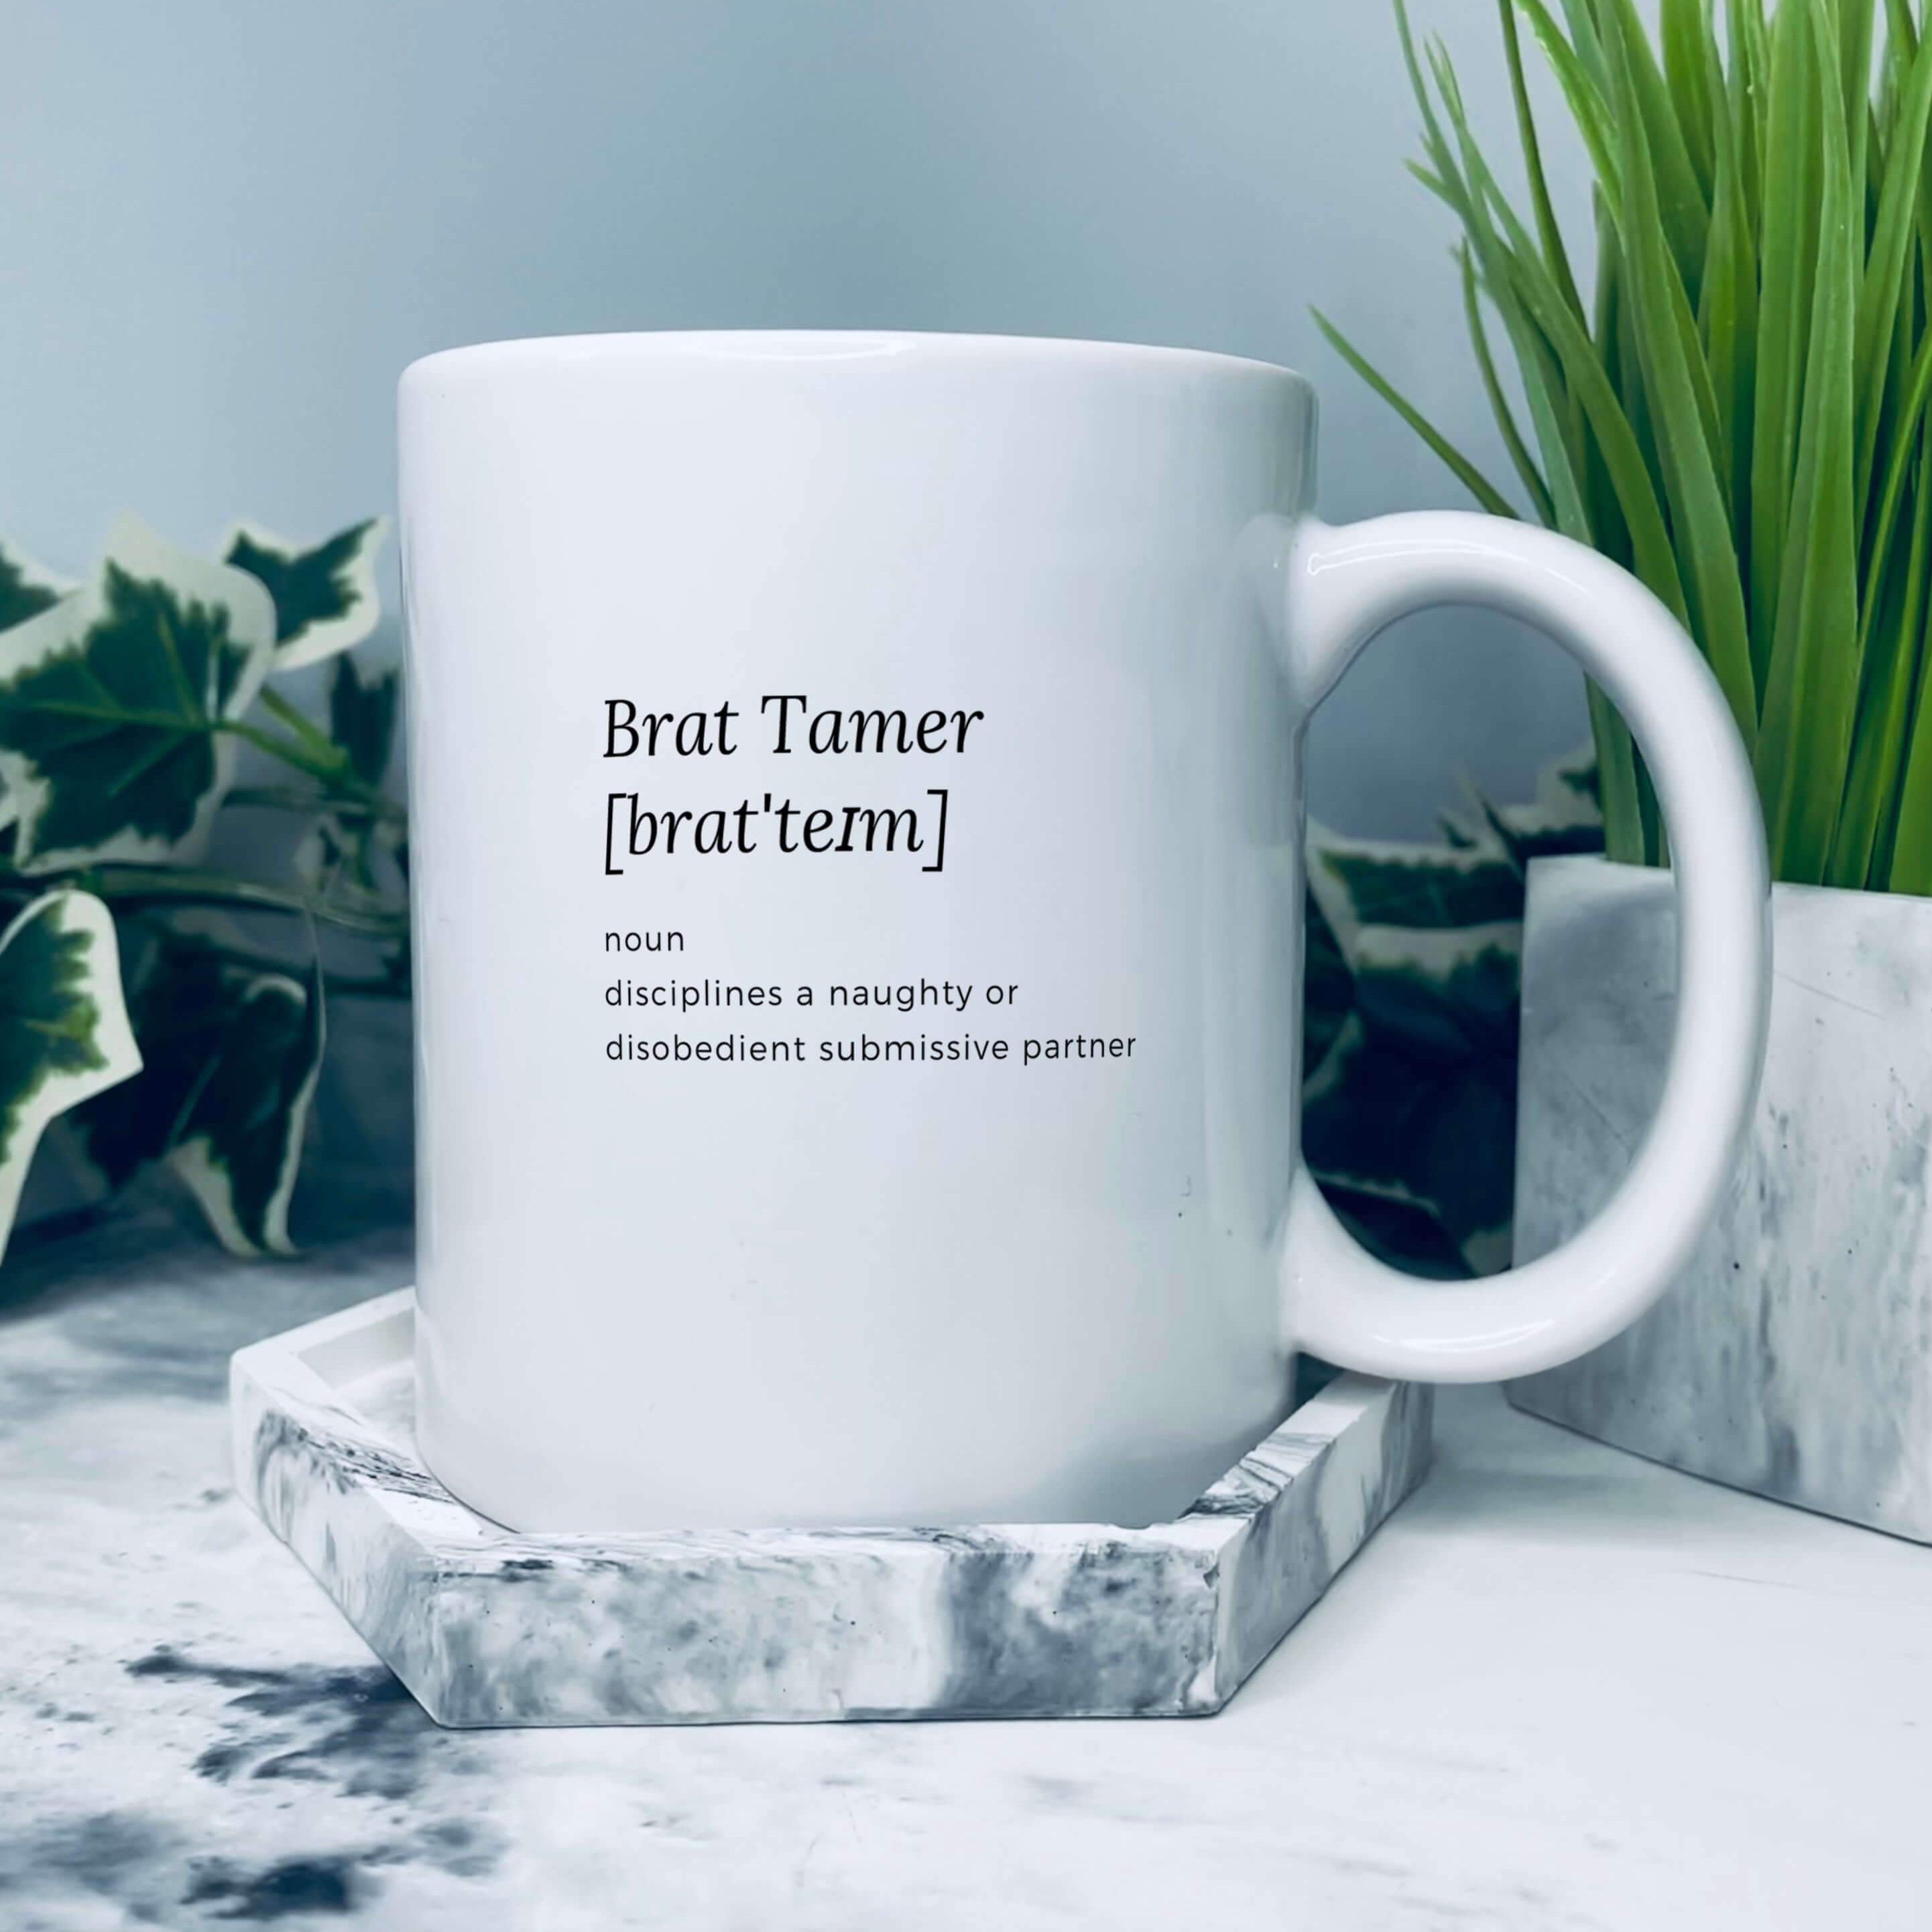 Mug that reads: Brat Tamer, noun: disciplines a naughty or disobedient submissive partner